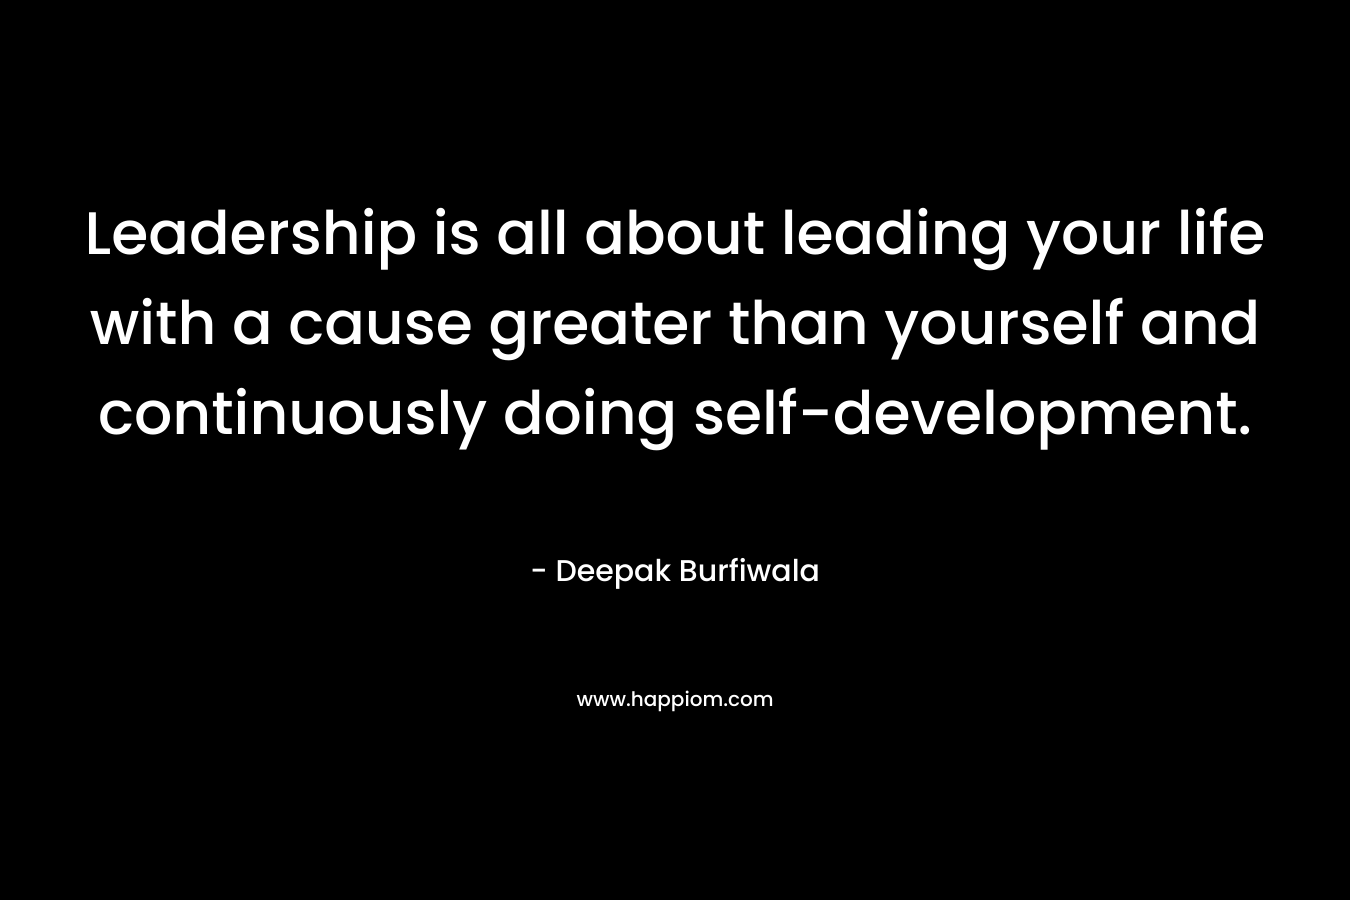 Leadership is all about leading your life with a cause greater than yourself and continuously doing self-development.